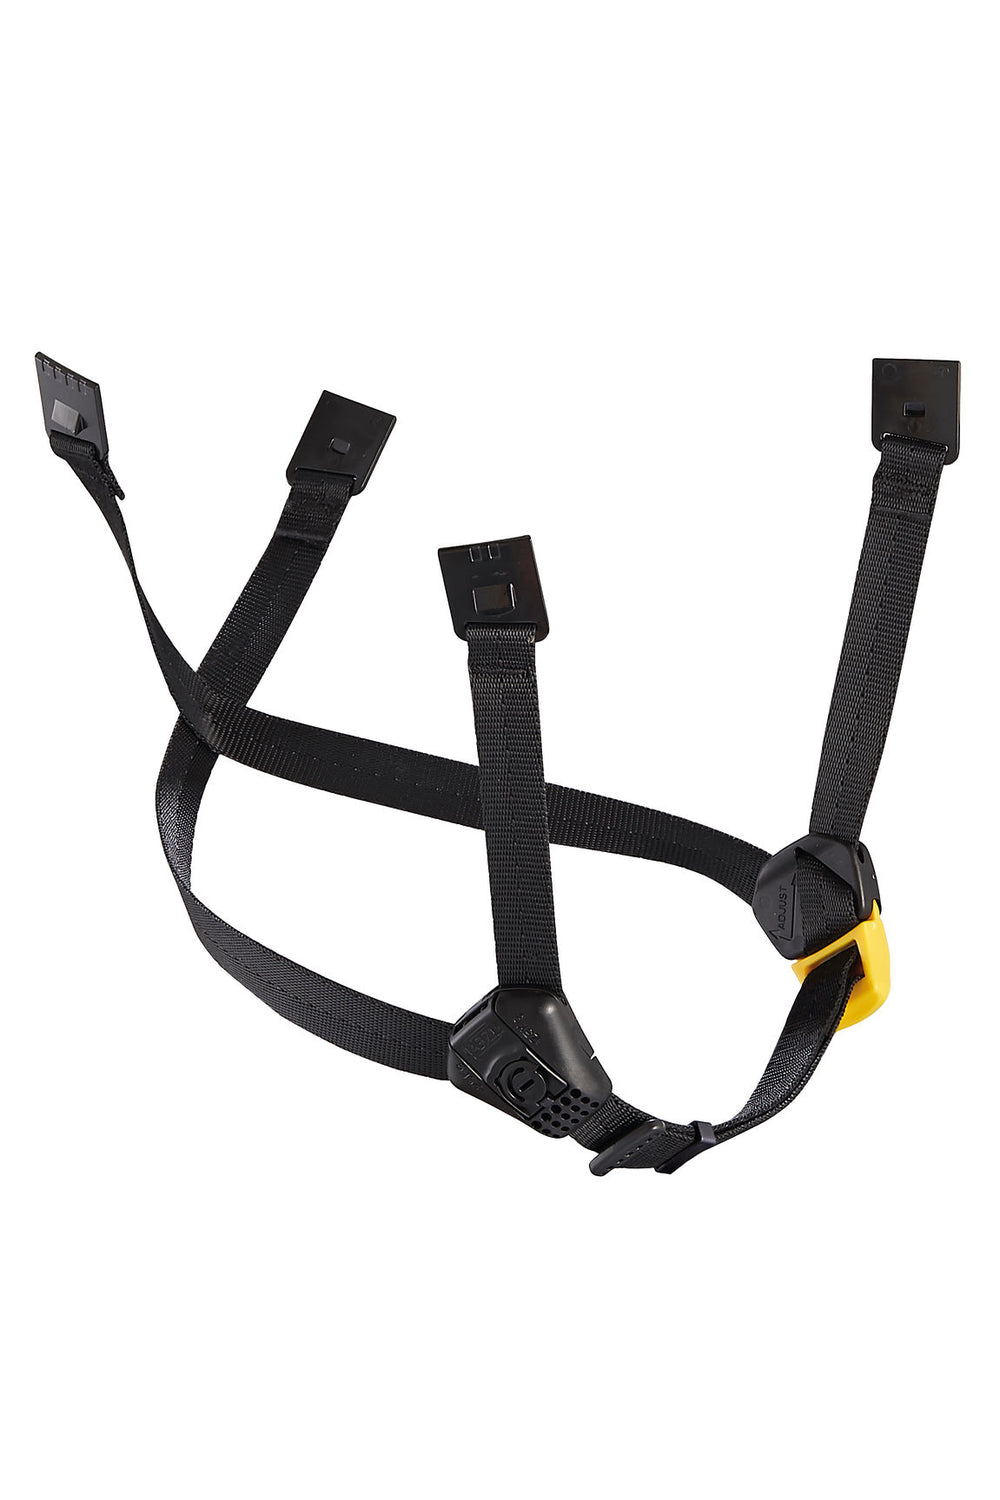 Petzl - Dual Chinstrap for Vertex and Strato Helmets